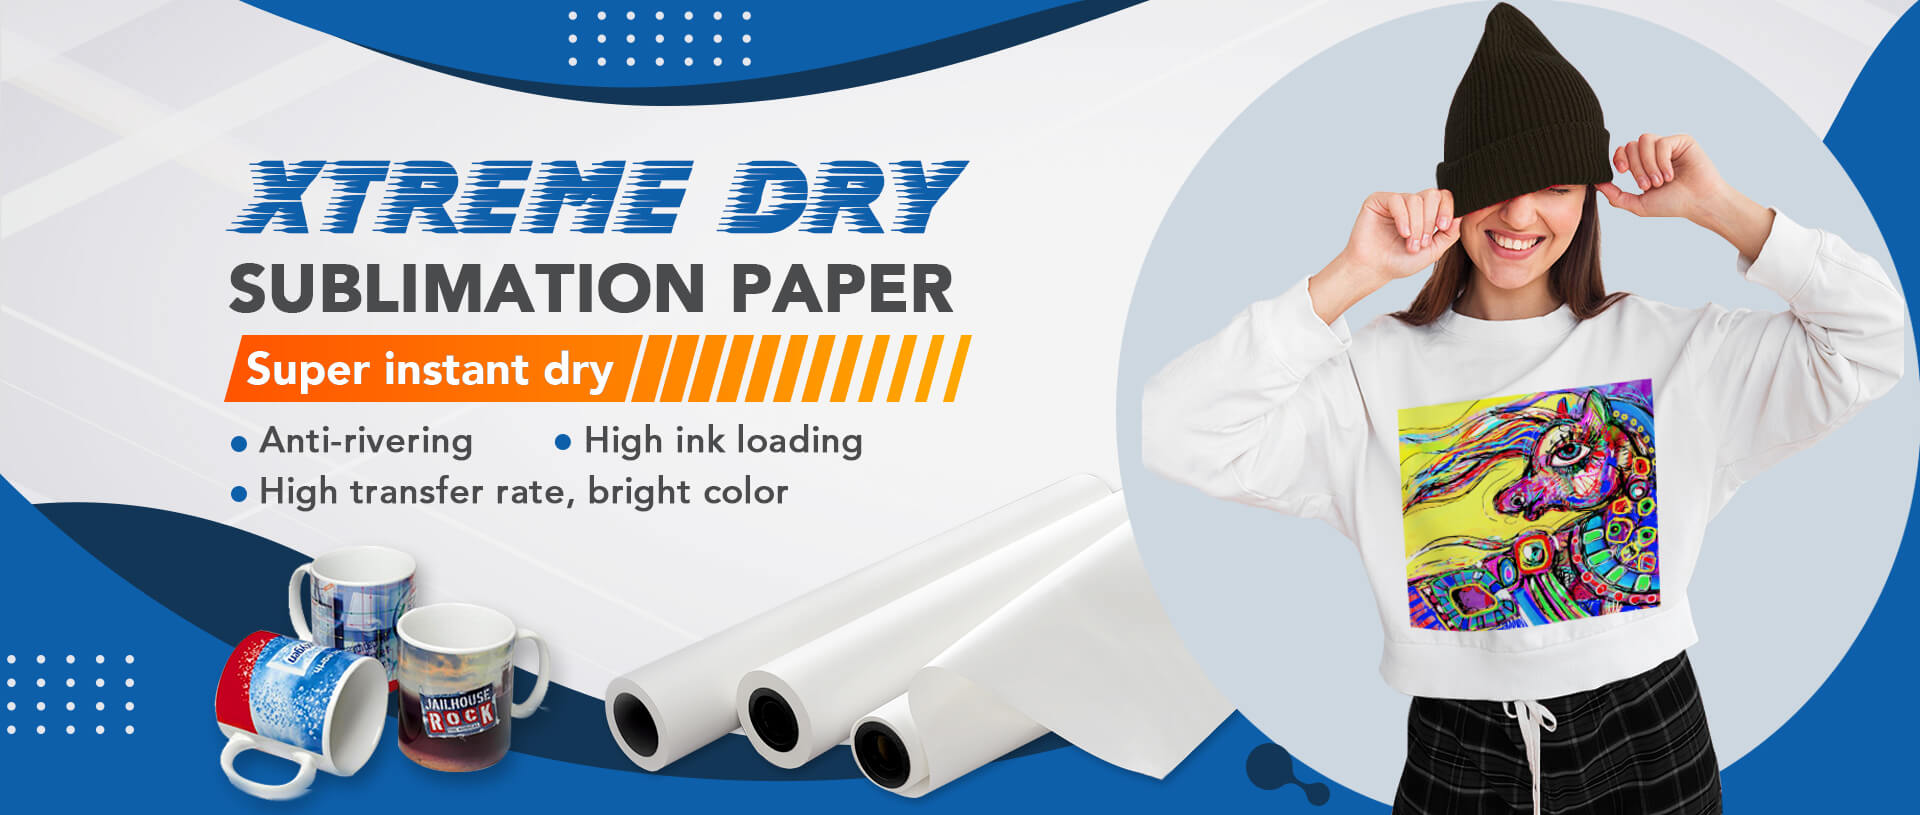 xtremely instant dry sublimation paper